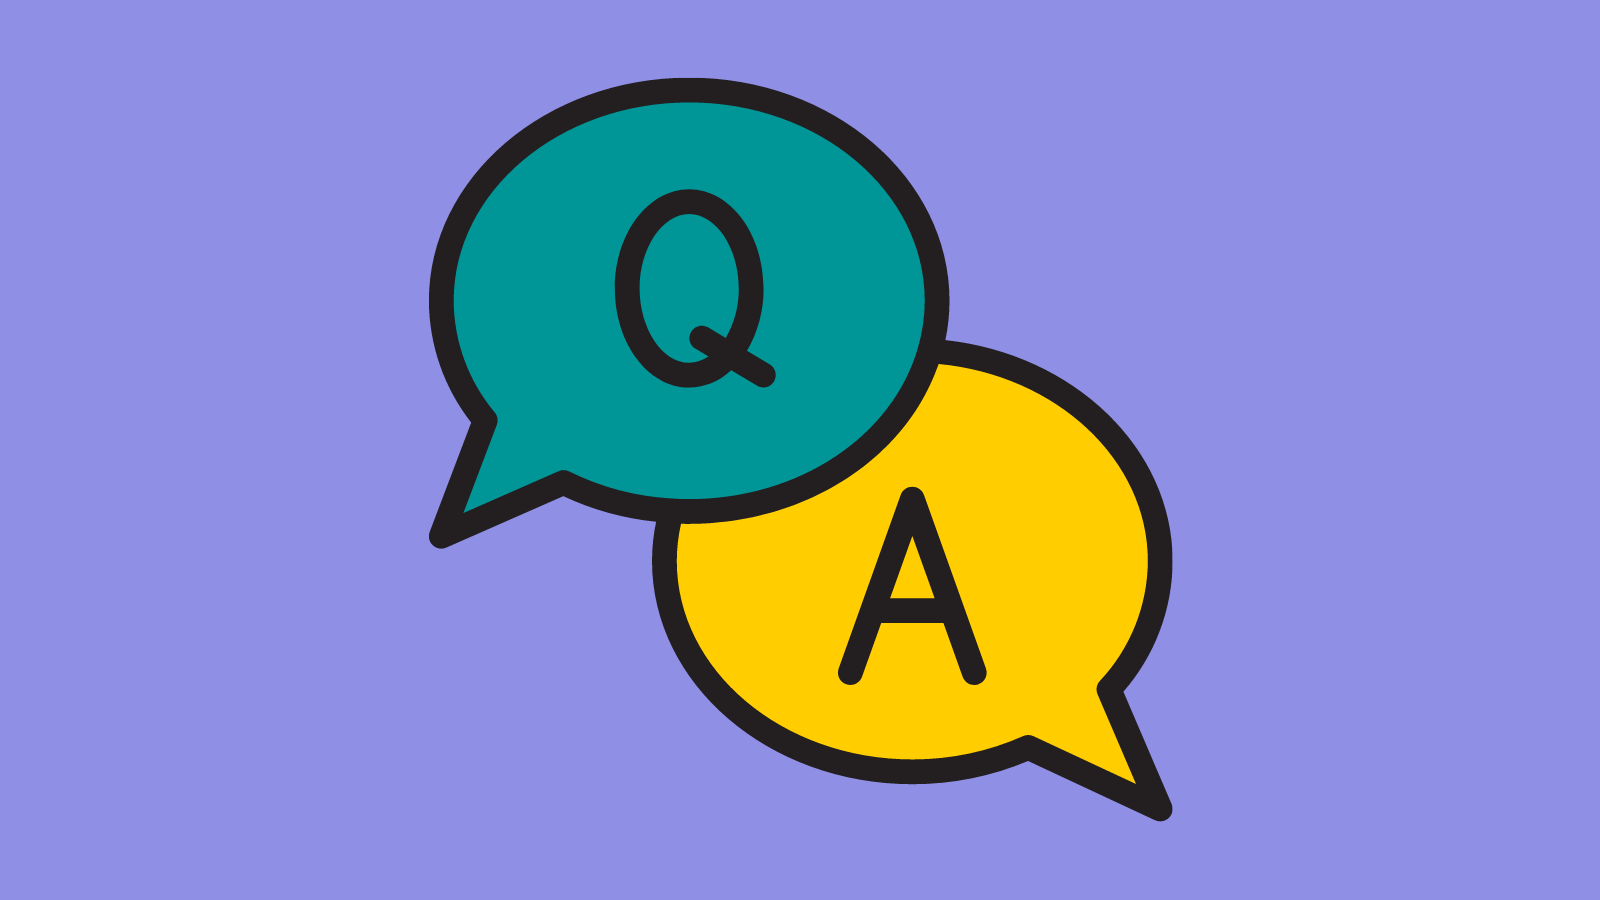 One speech bubble with the letter Q and another with the letter A